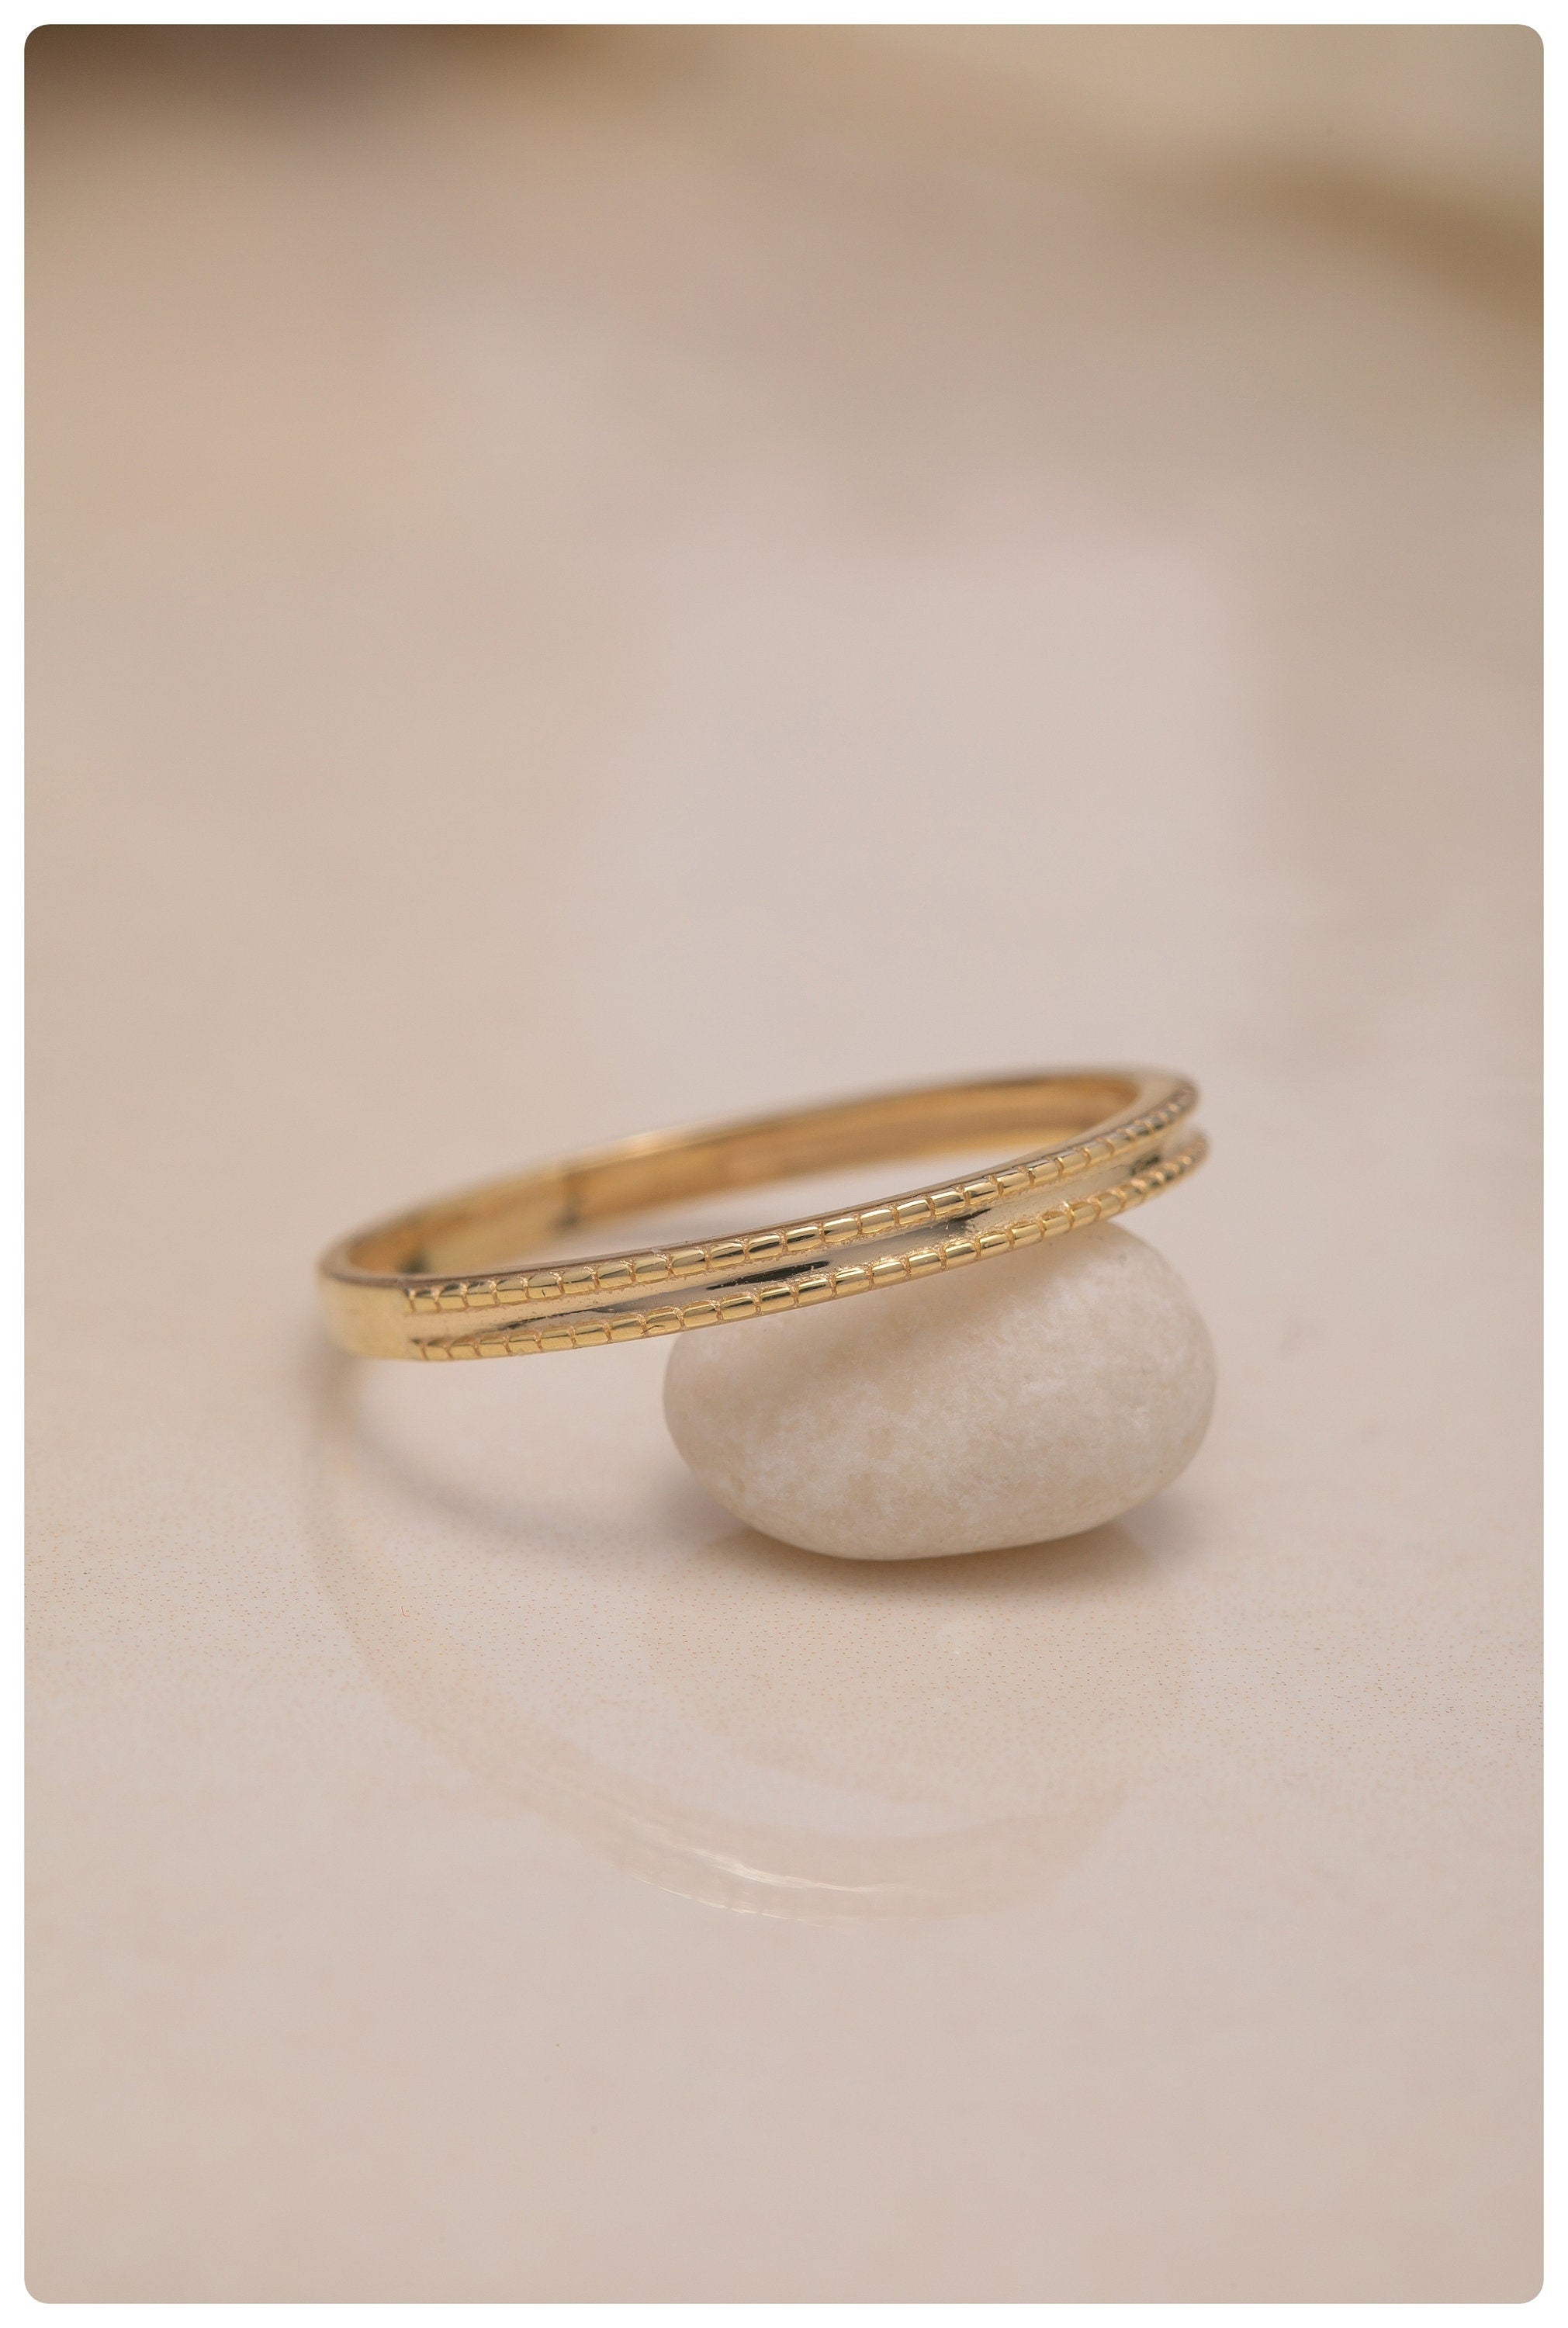 14K Statement Ring, Minimalist Bridal Wedding Ring, Gold Rings for Women, Anniversary Ring, 925 Sterling Silver, Dainty Ring, Unique Ring